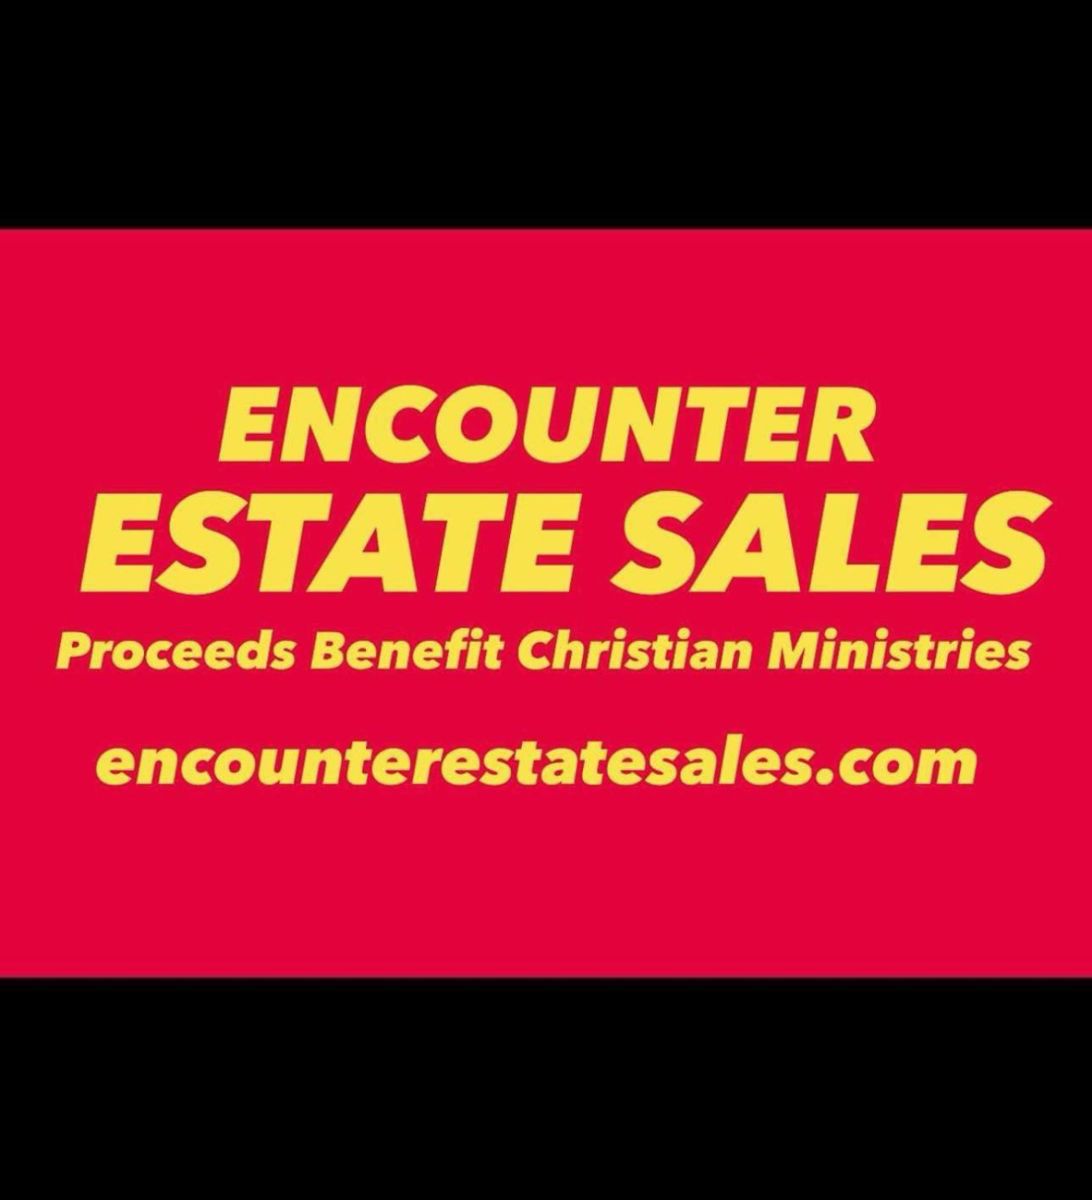 We are a nonprofit Estate Sale company. All of our proceeds 30% go to fund Christian ministries.  For information about hosting In estate Sale contact us at encounterestatesales.com
